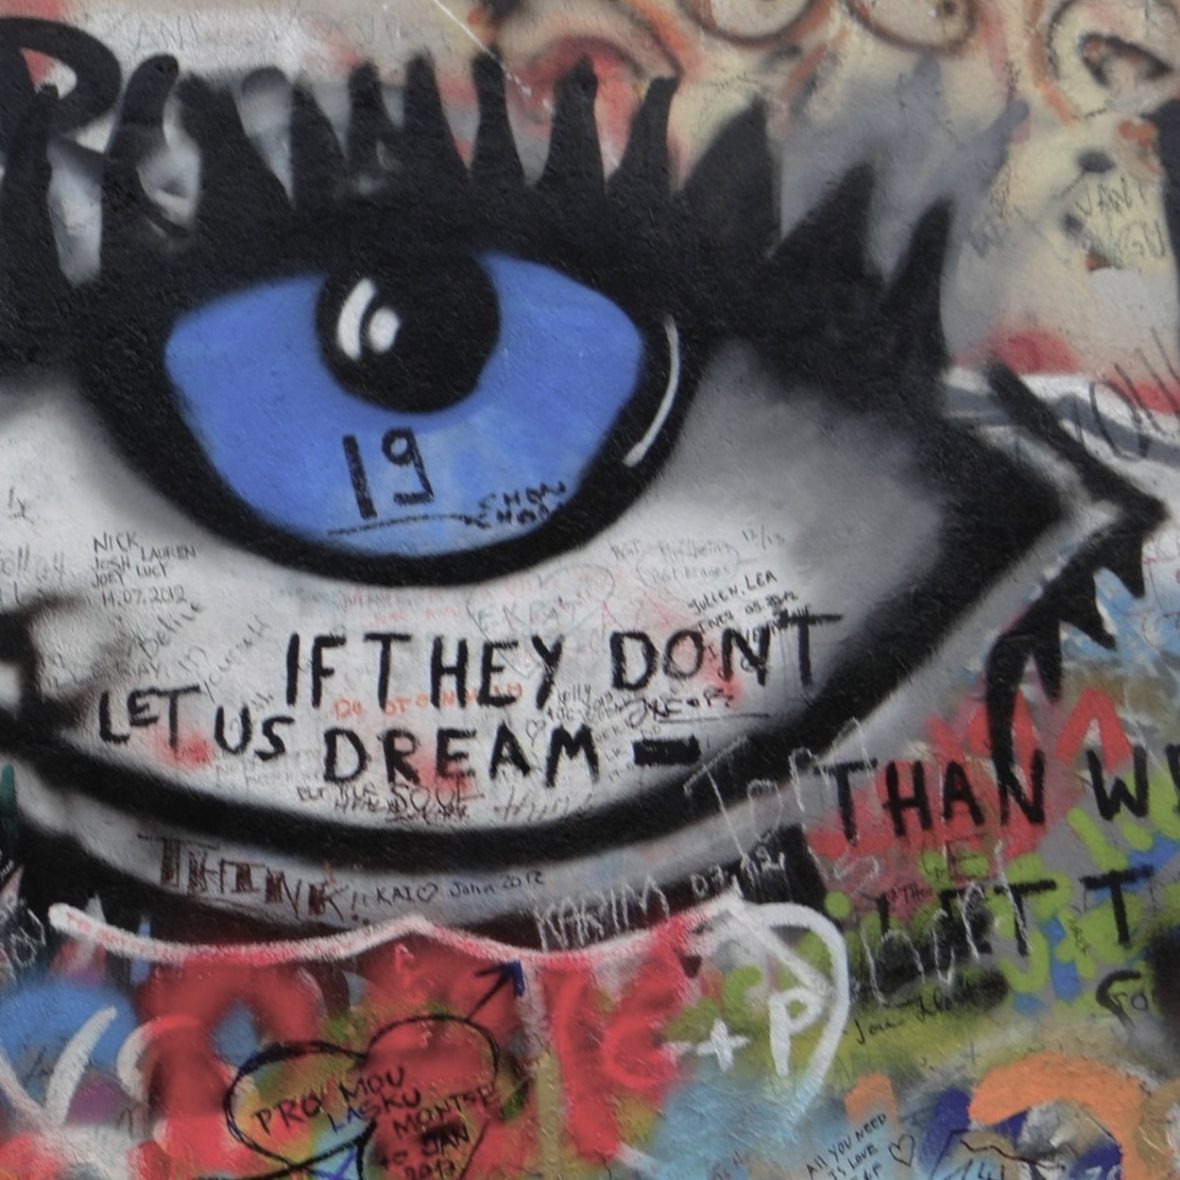 graffiti of a blue eye on a wall with the words "IF THEY DON'T LET US DREAM" written on the white part of the eye